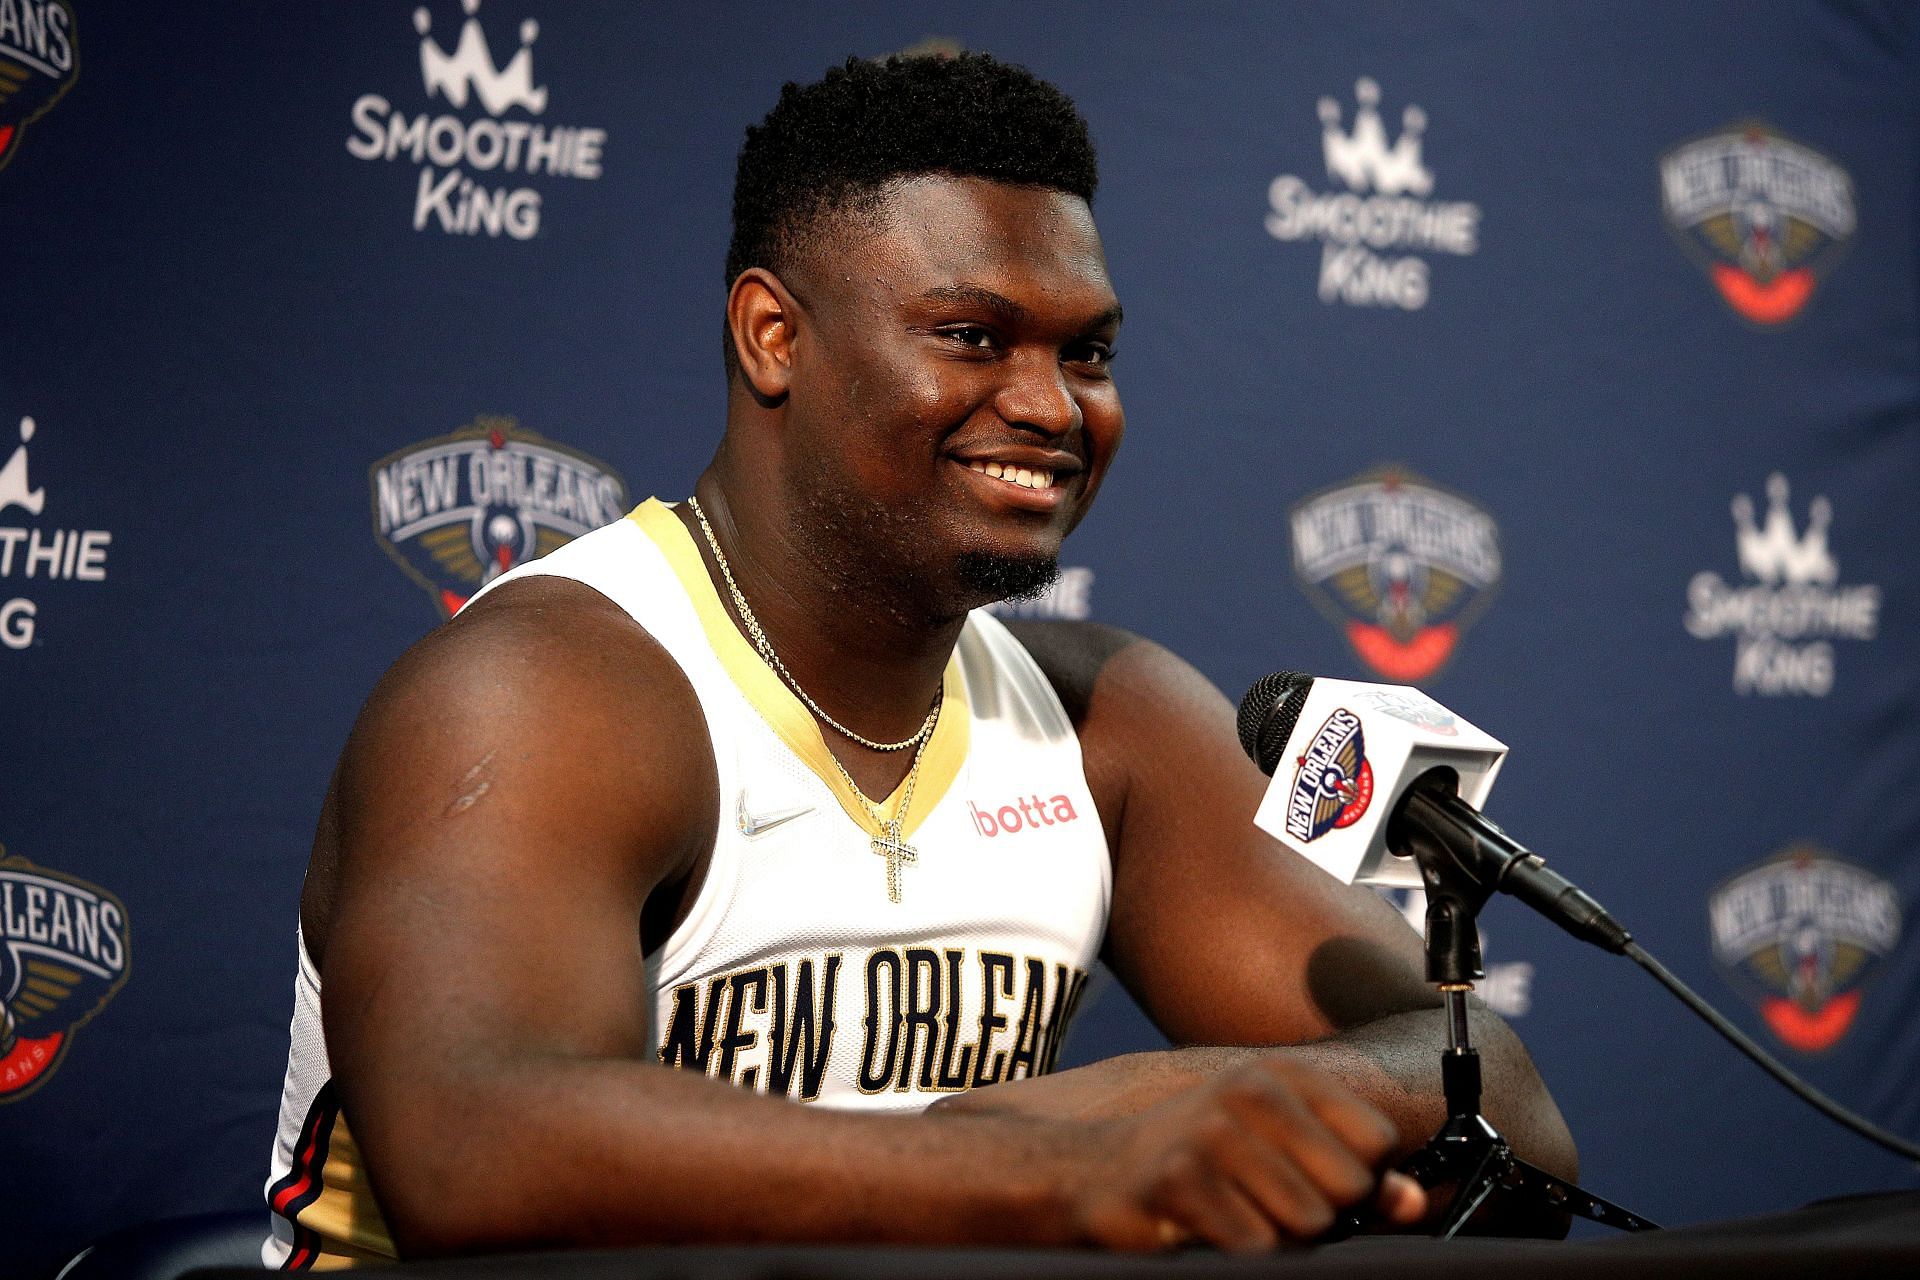 Zion Williamson at the New Orleans Pelicans Media Day - 2021